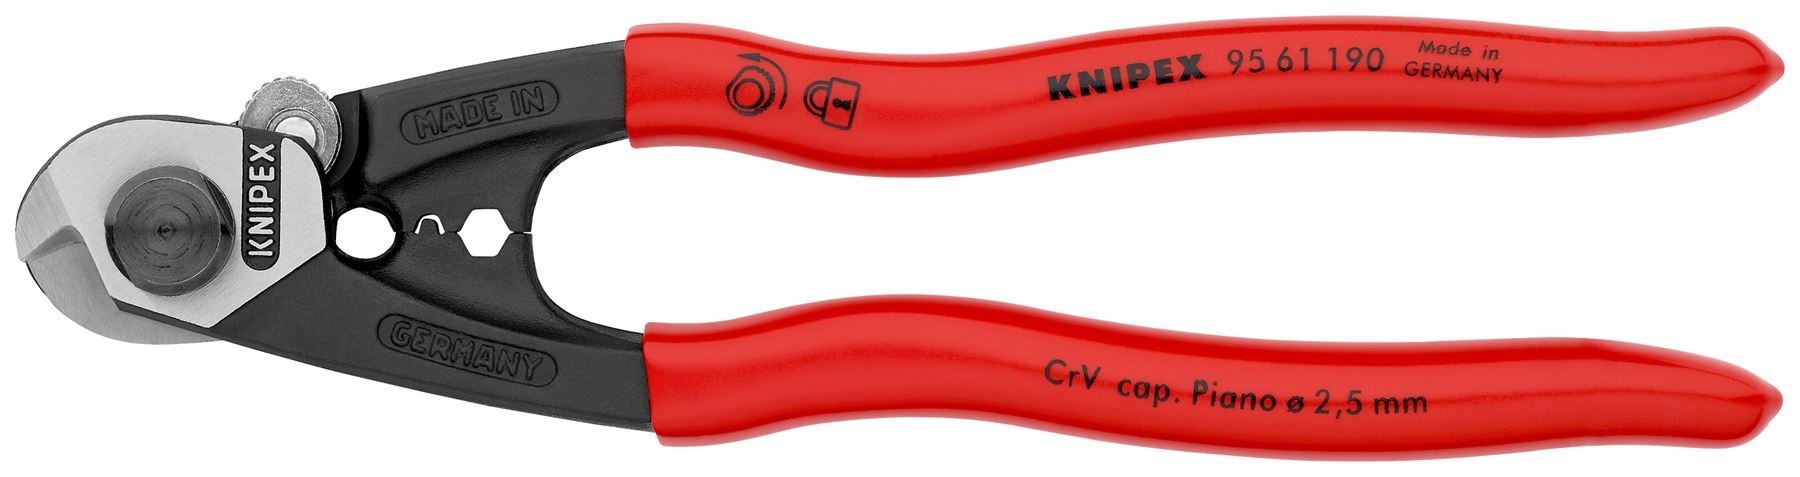 Knipex Wire Rope Cutters Forged Cutting Pliers Polished Head up to 7mm Capacity 190mm 95 61 190